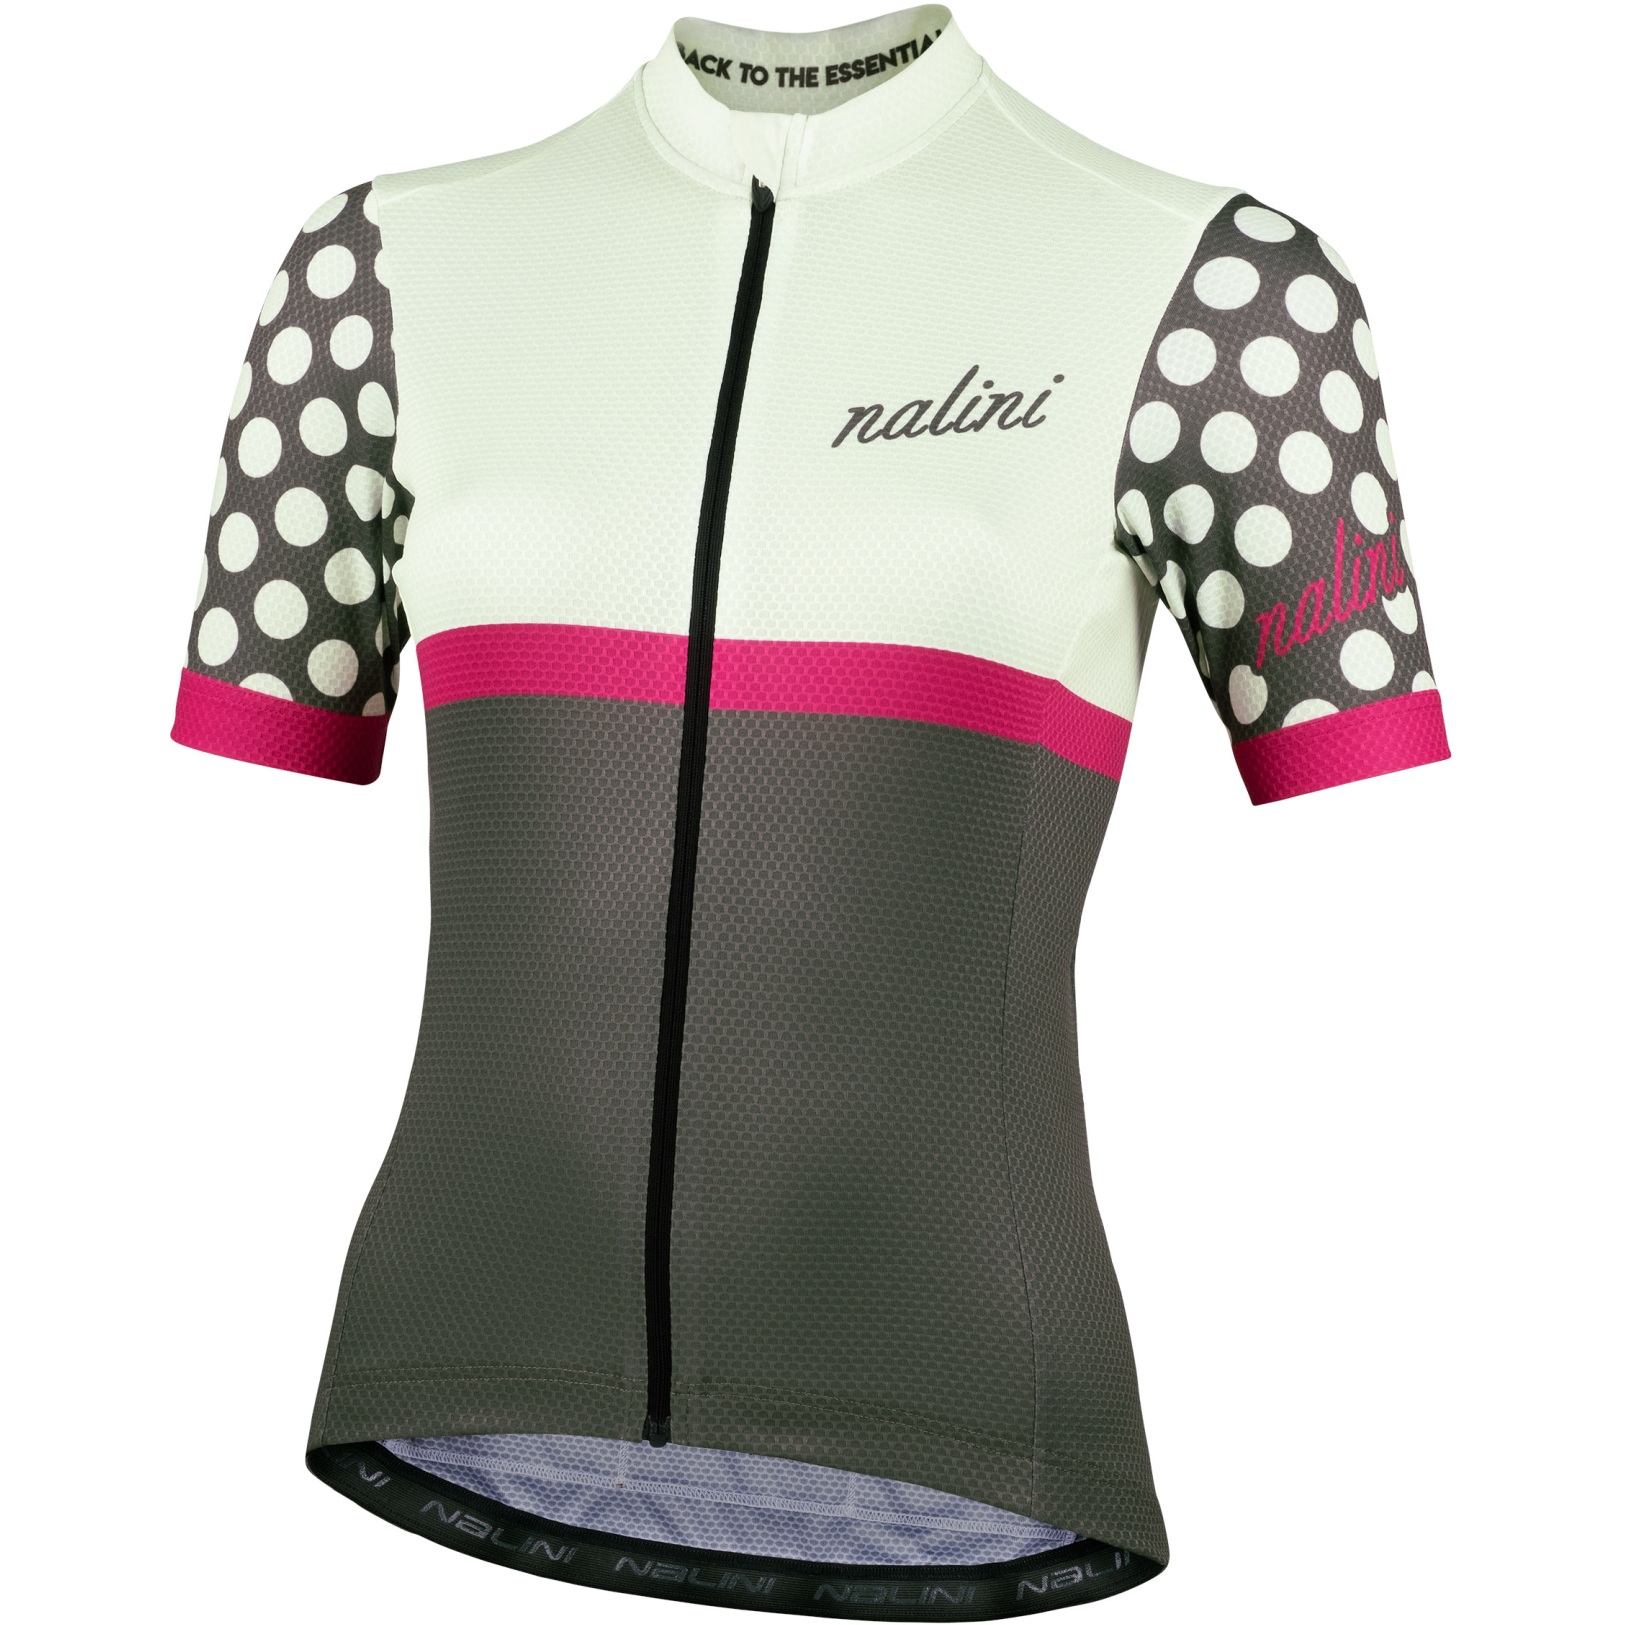 Foto de Nalini Maillot Ciclismo Mujer - Solid - olive green 4400